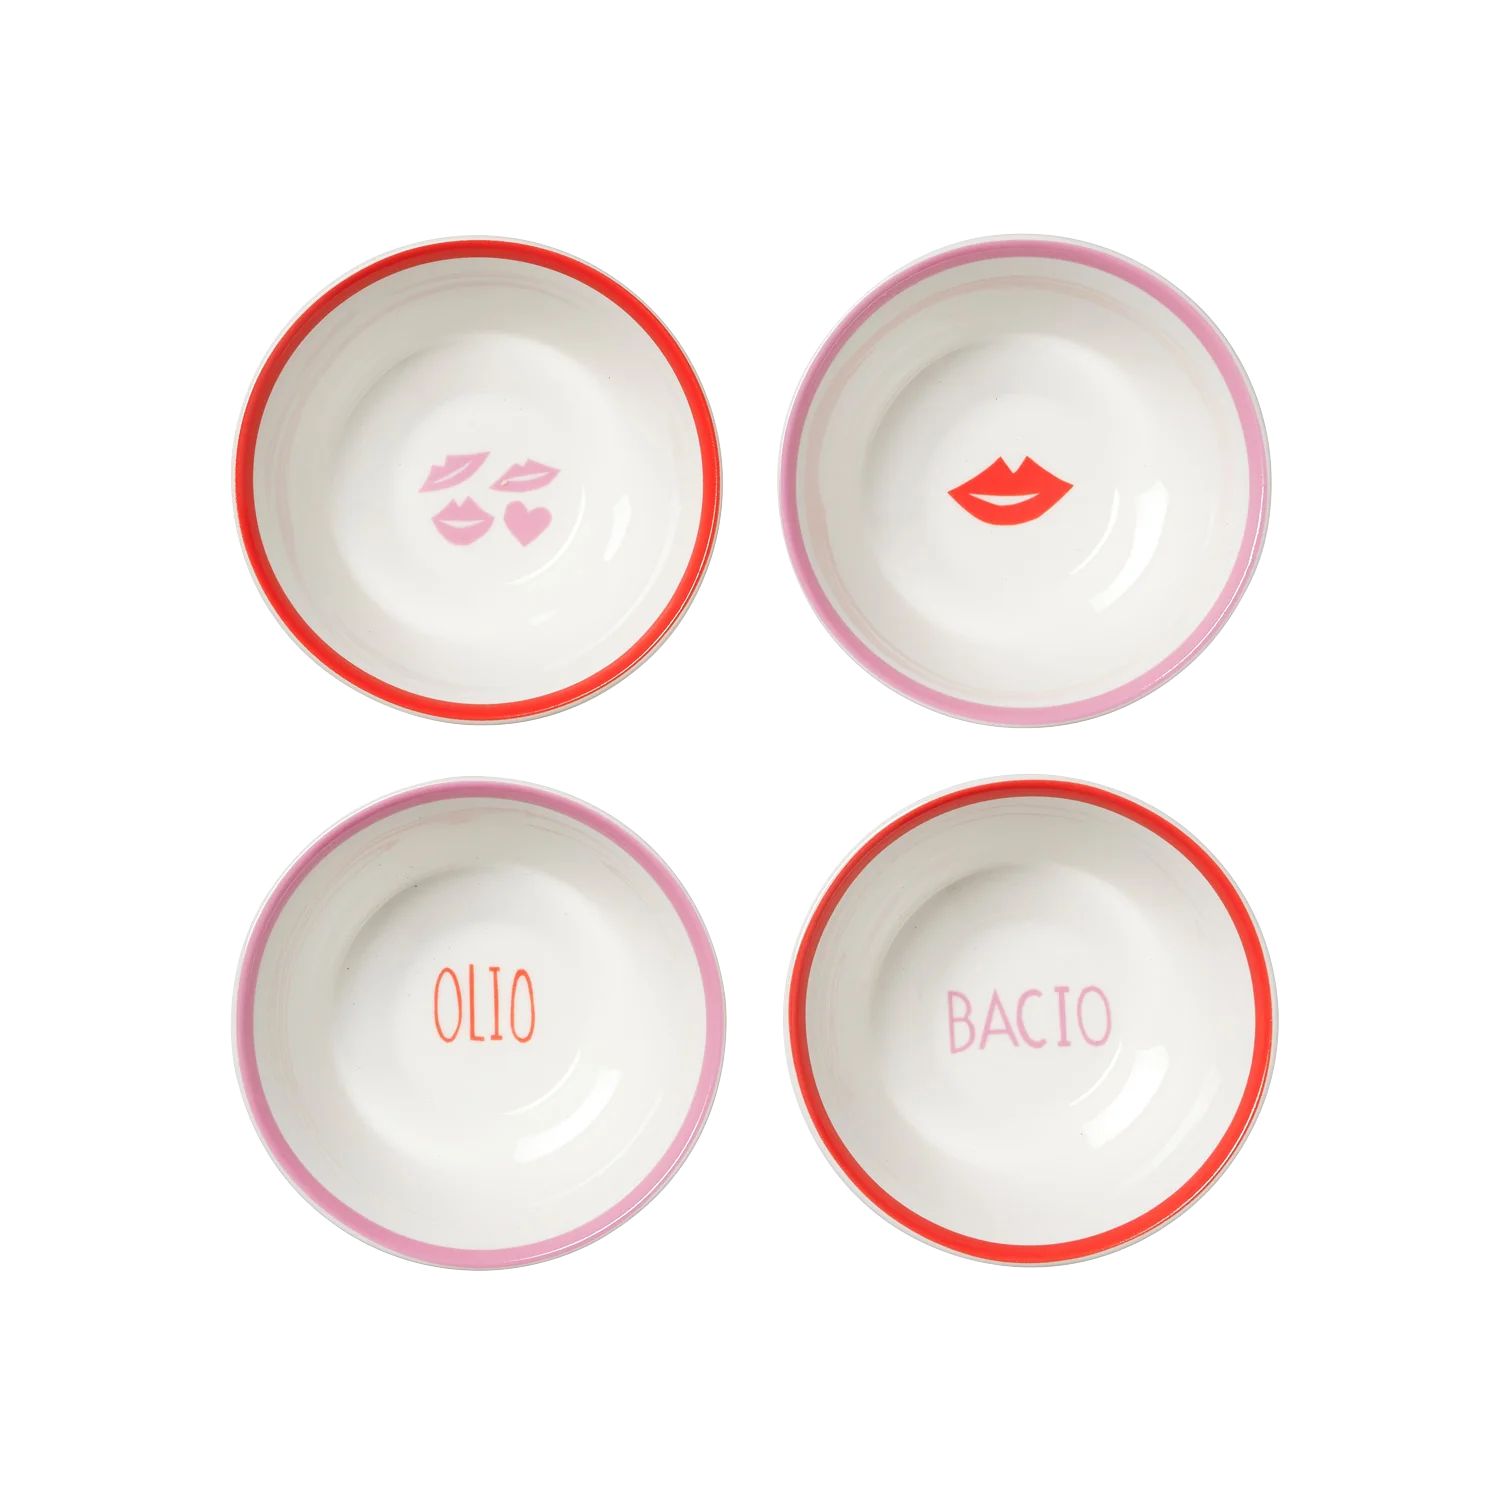 Bacio Dipping Bowl Set | In the Roundhouse